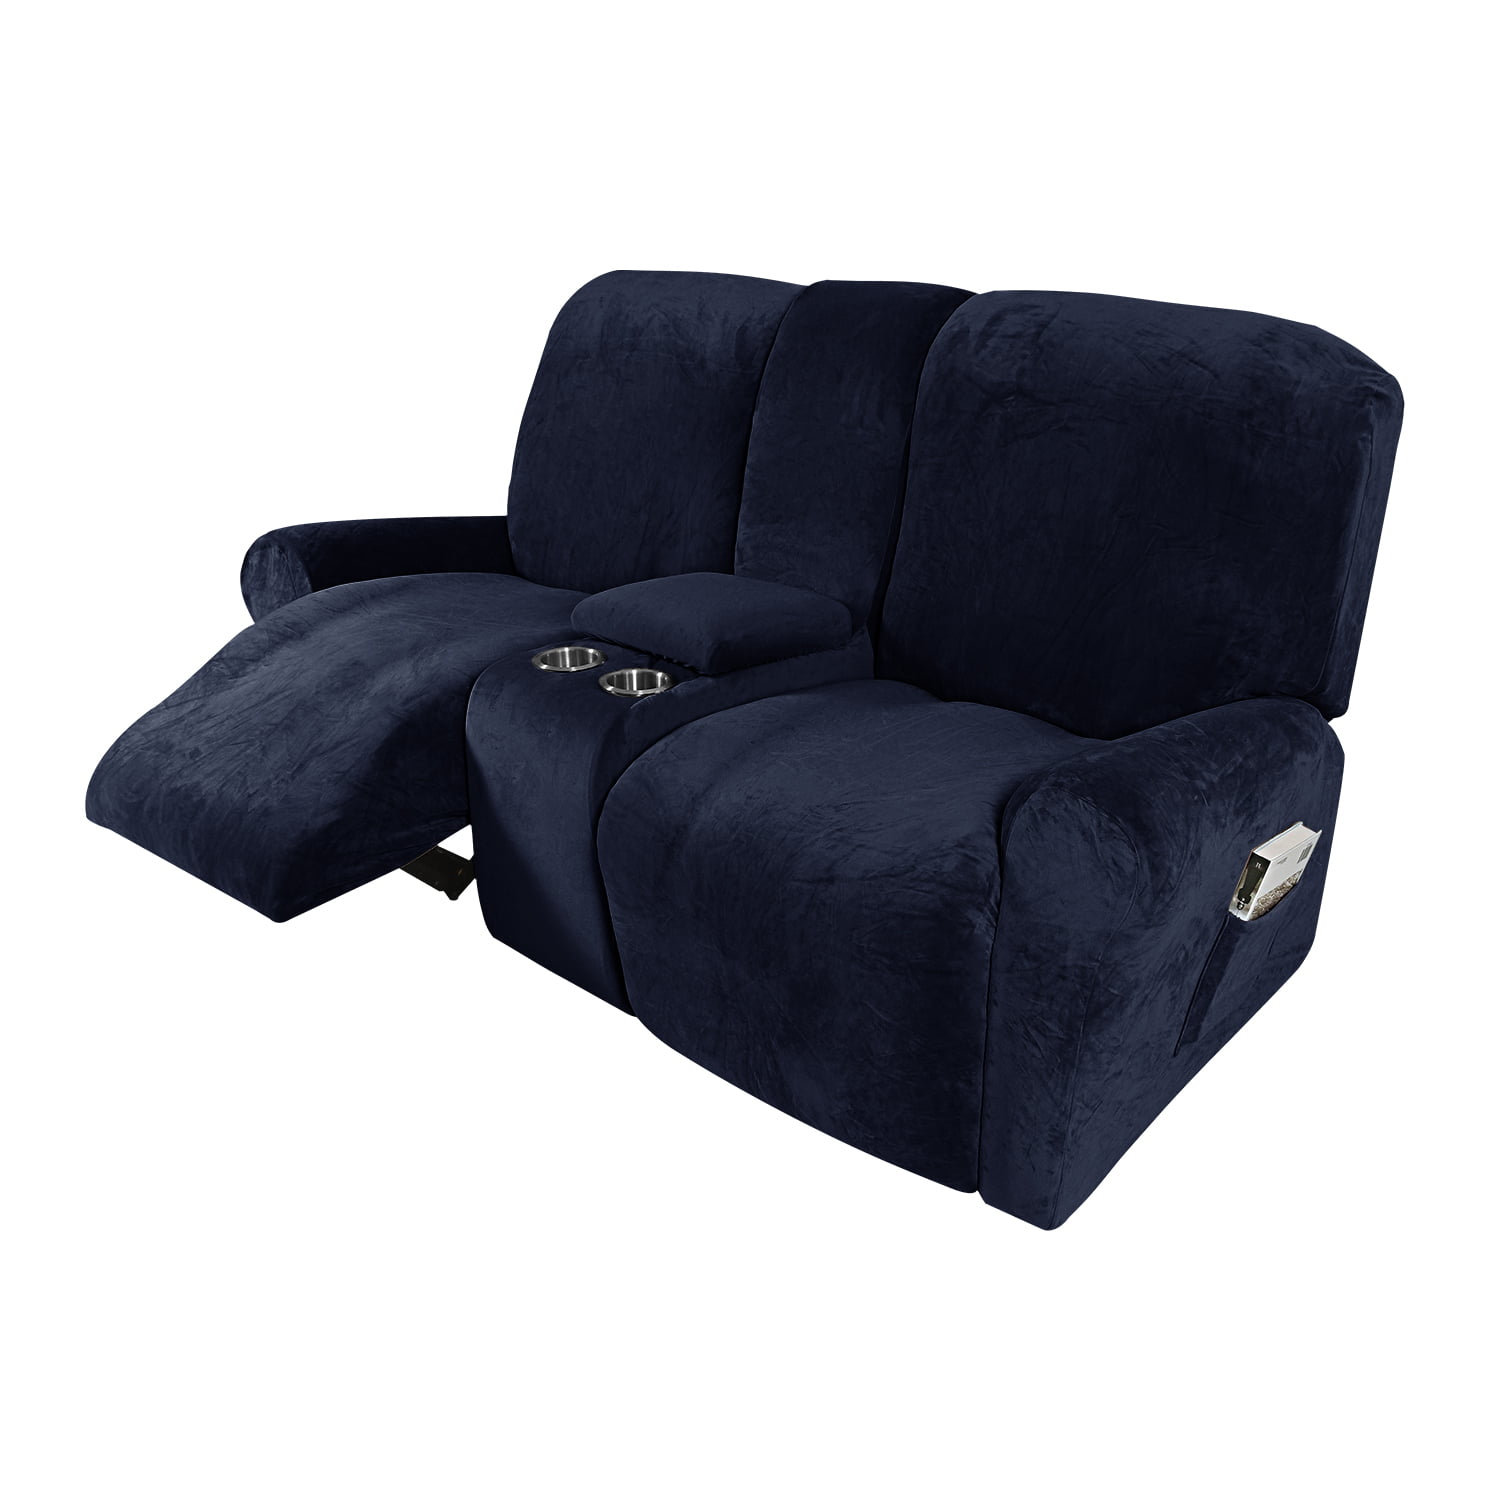 Stretch Recliner Sofa Slipcover Velvet Fabric Furniture Armchair Couch Cover